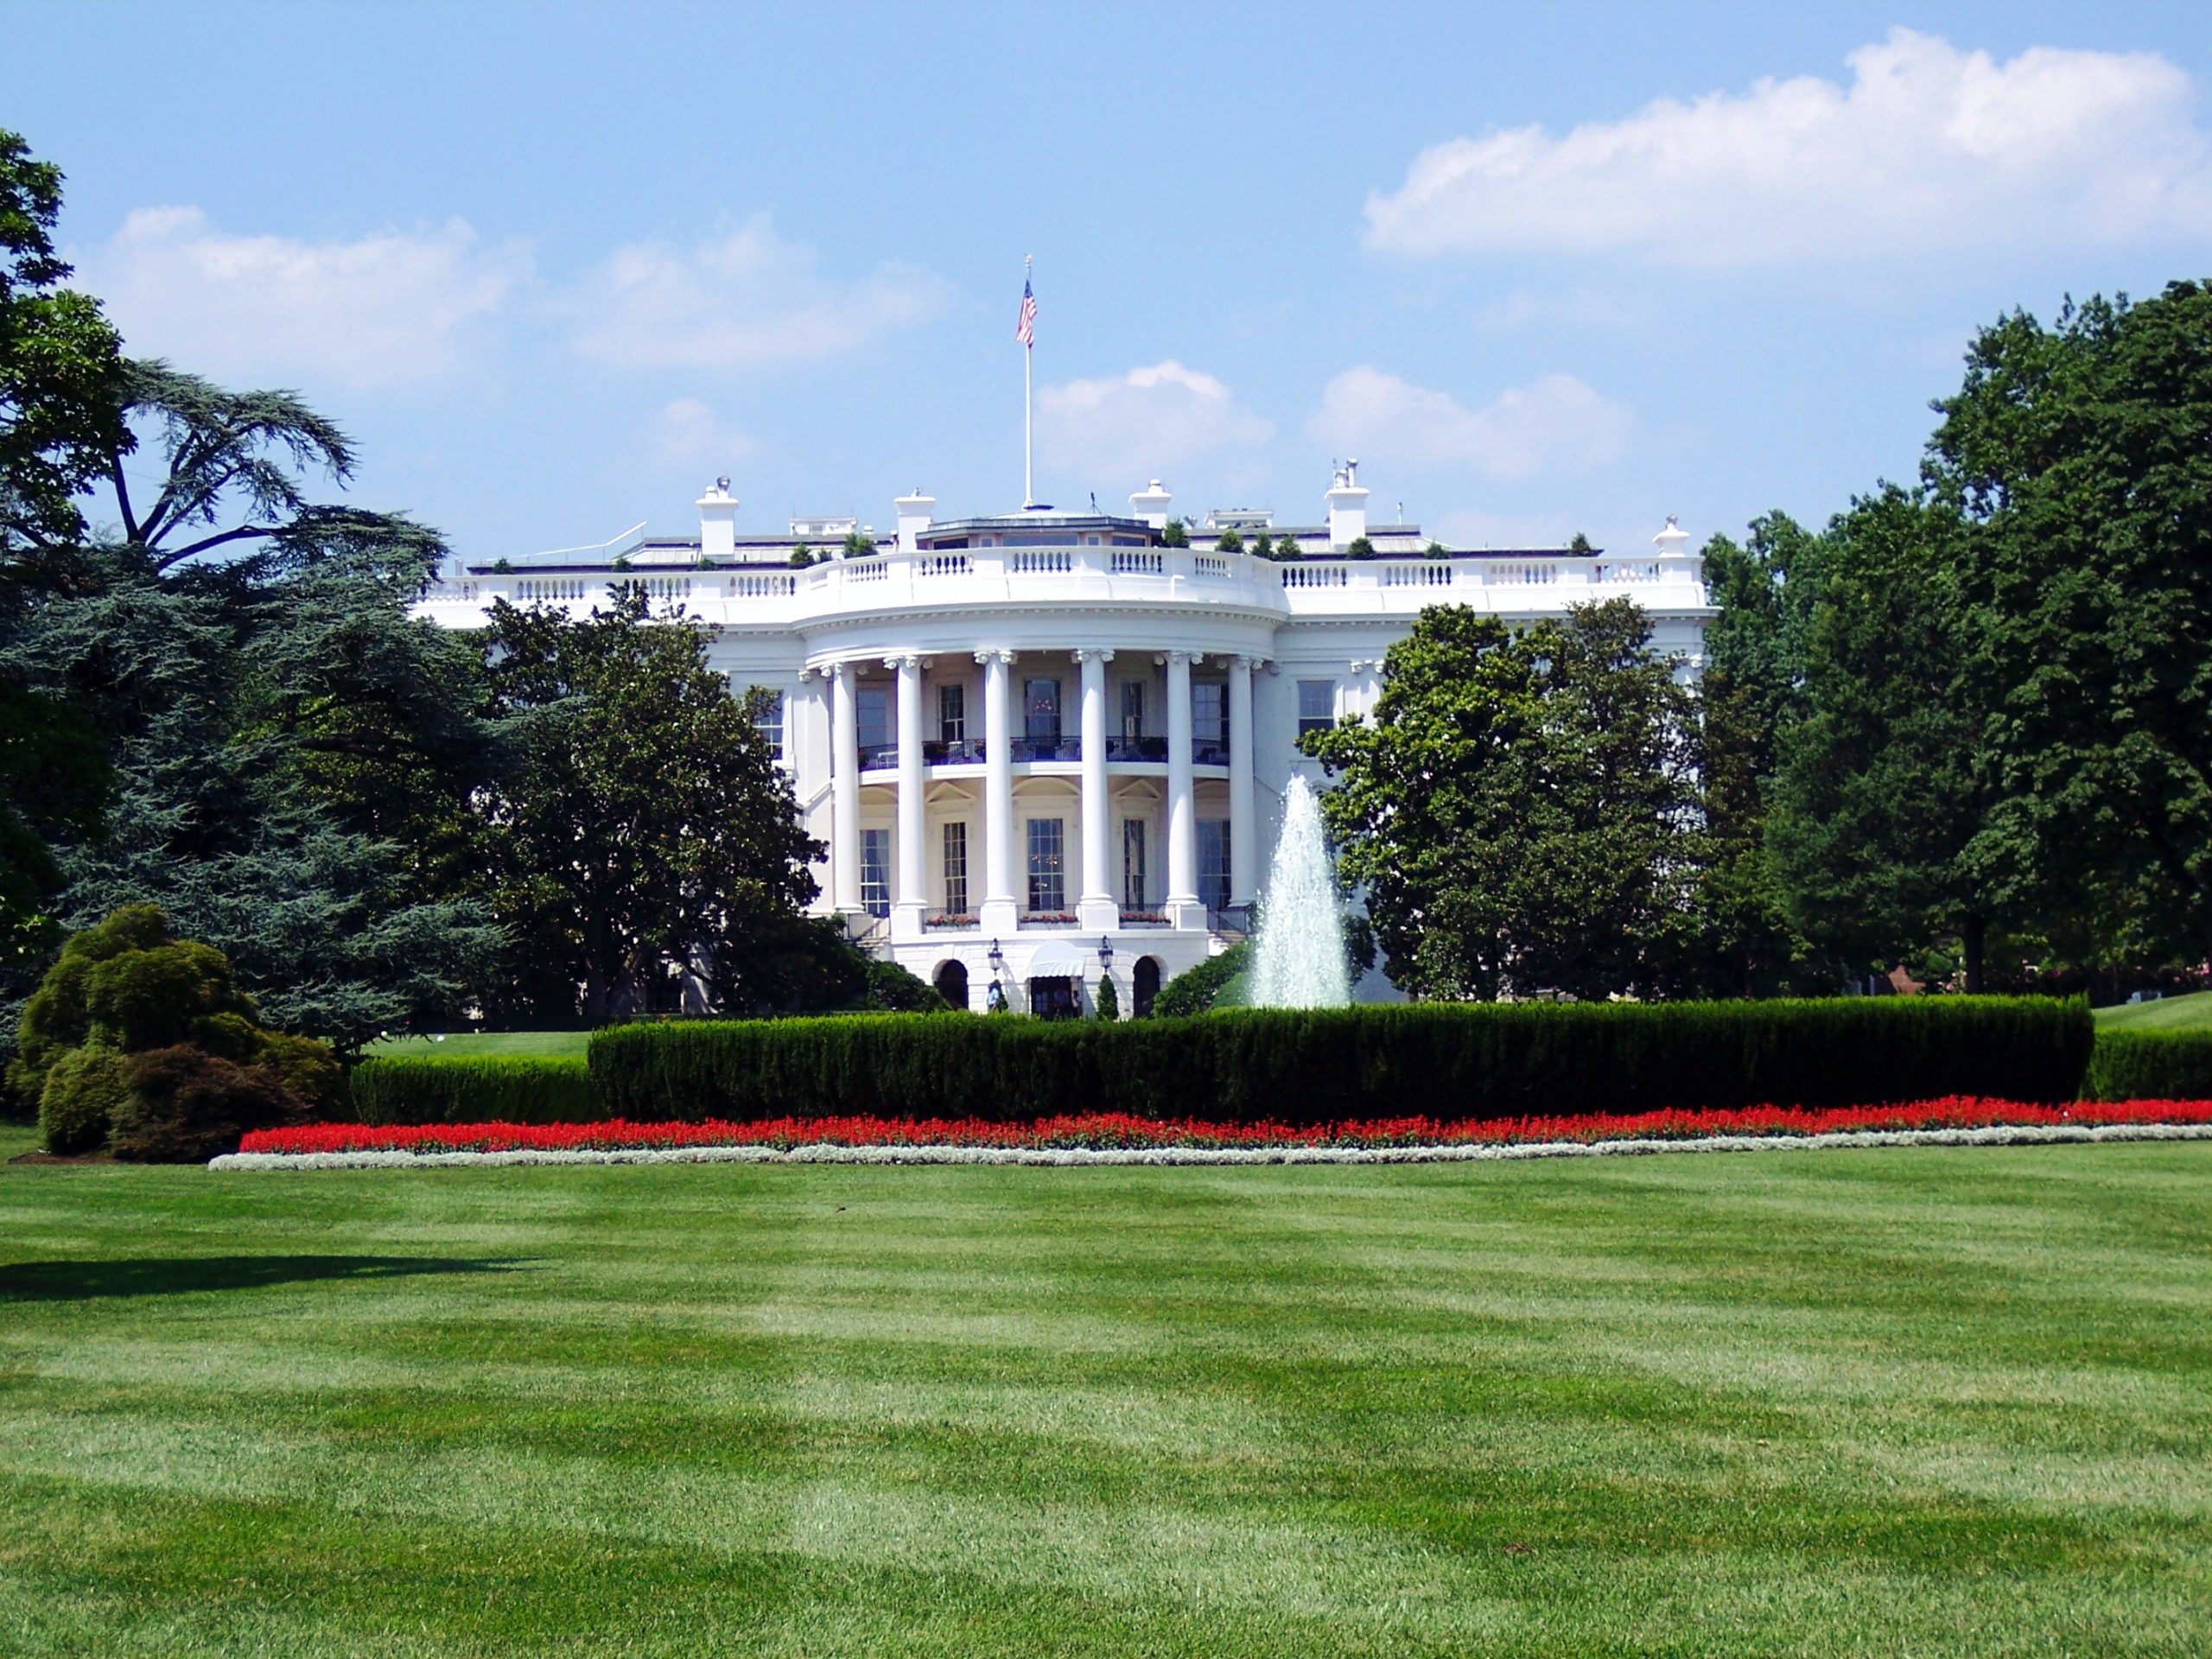 A photo of the White House and the lawn